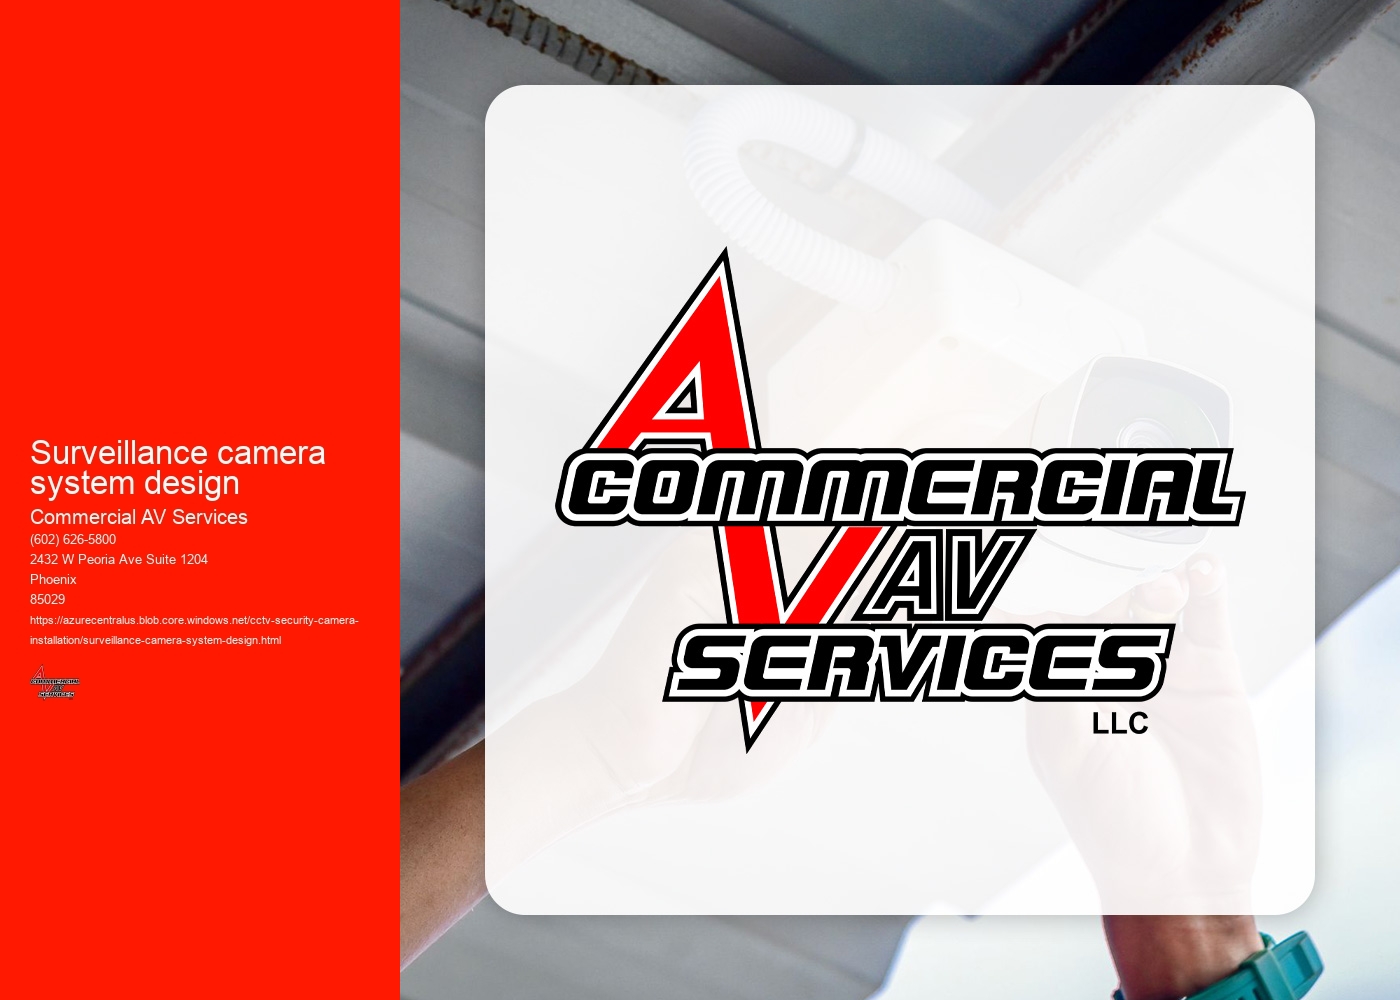 What are the best practices for integrating a surveillance camera system with access control and alarm systems in a commercial setting?